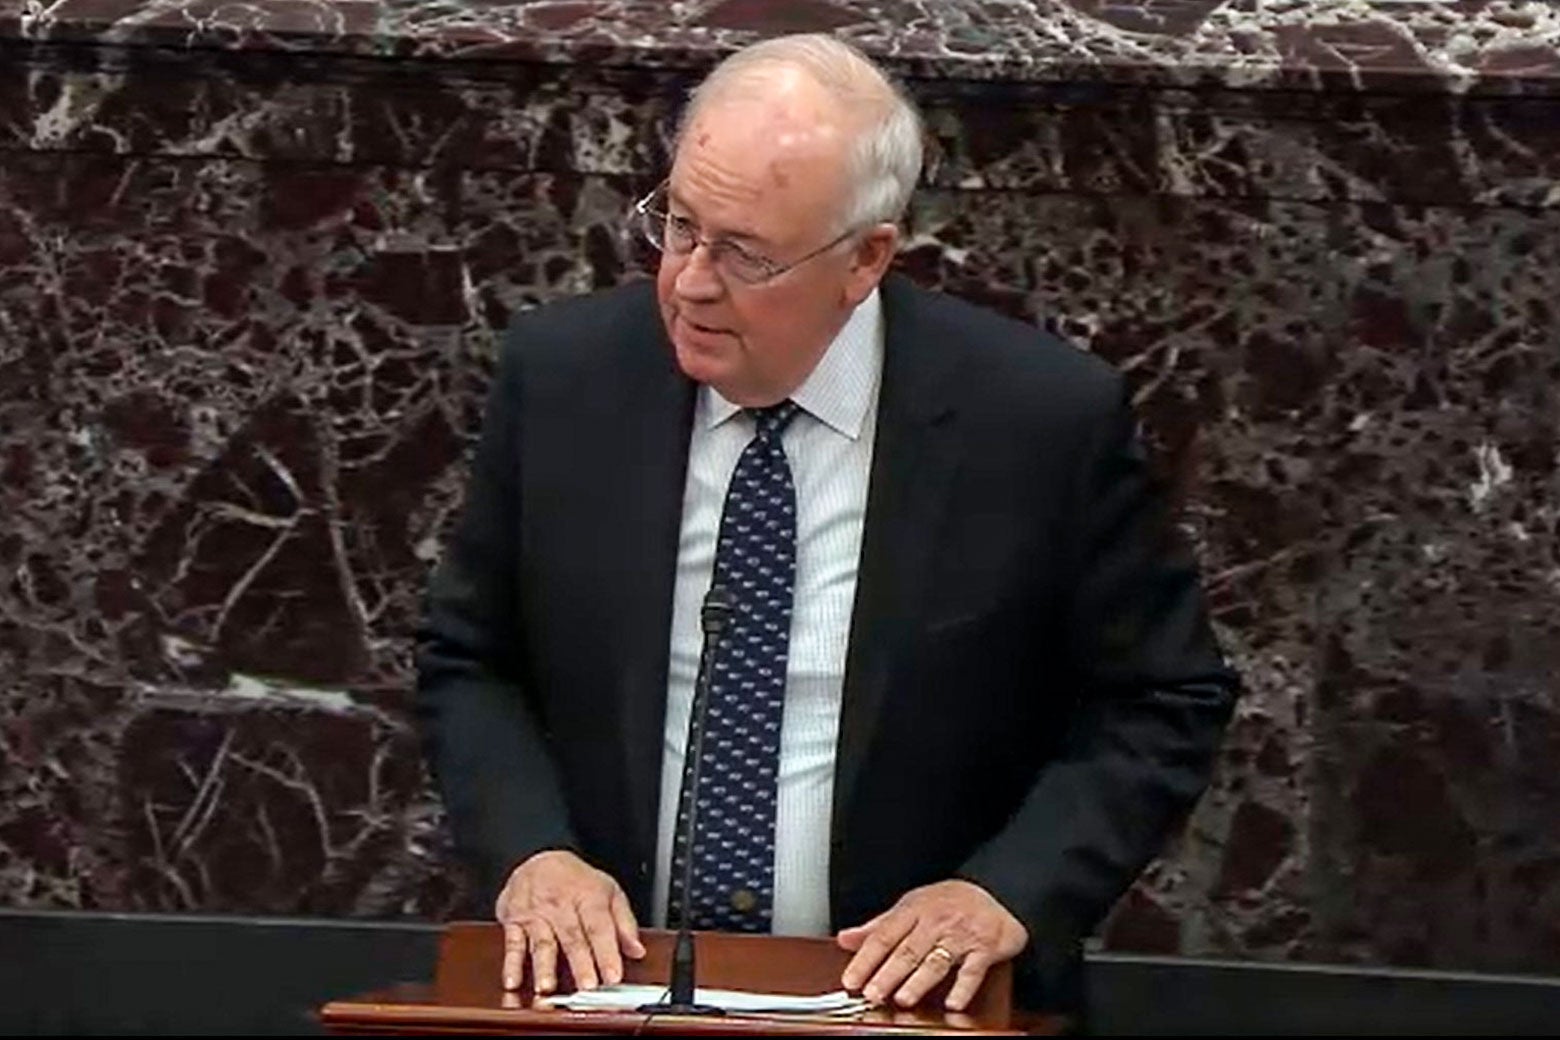 Starr standing at a lectern